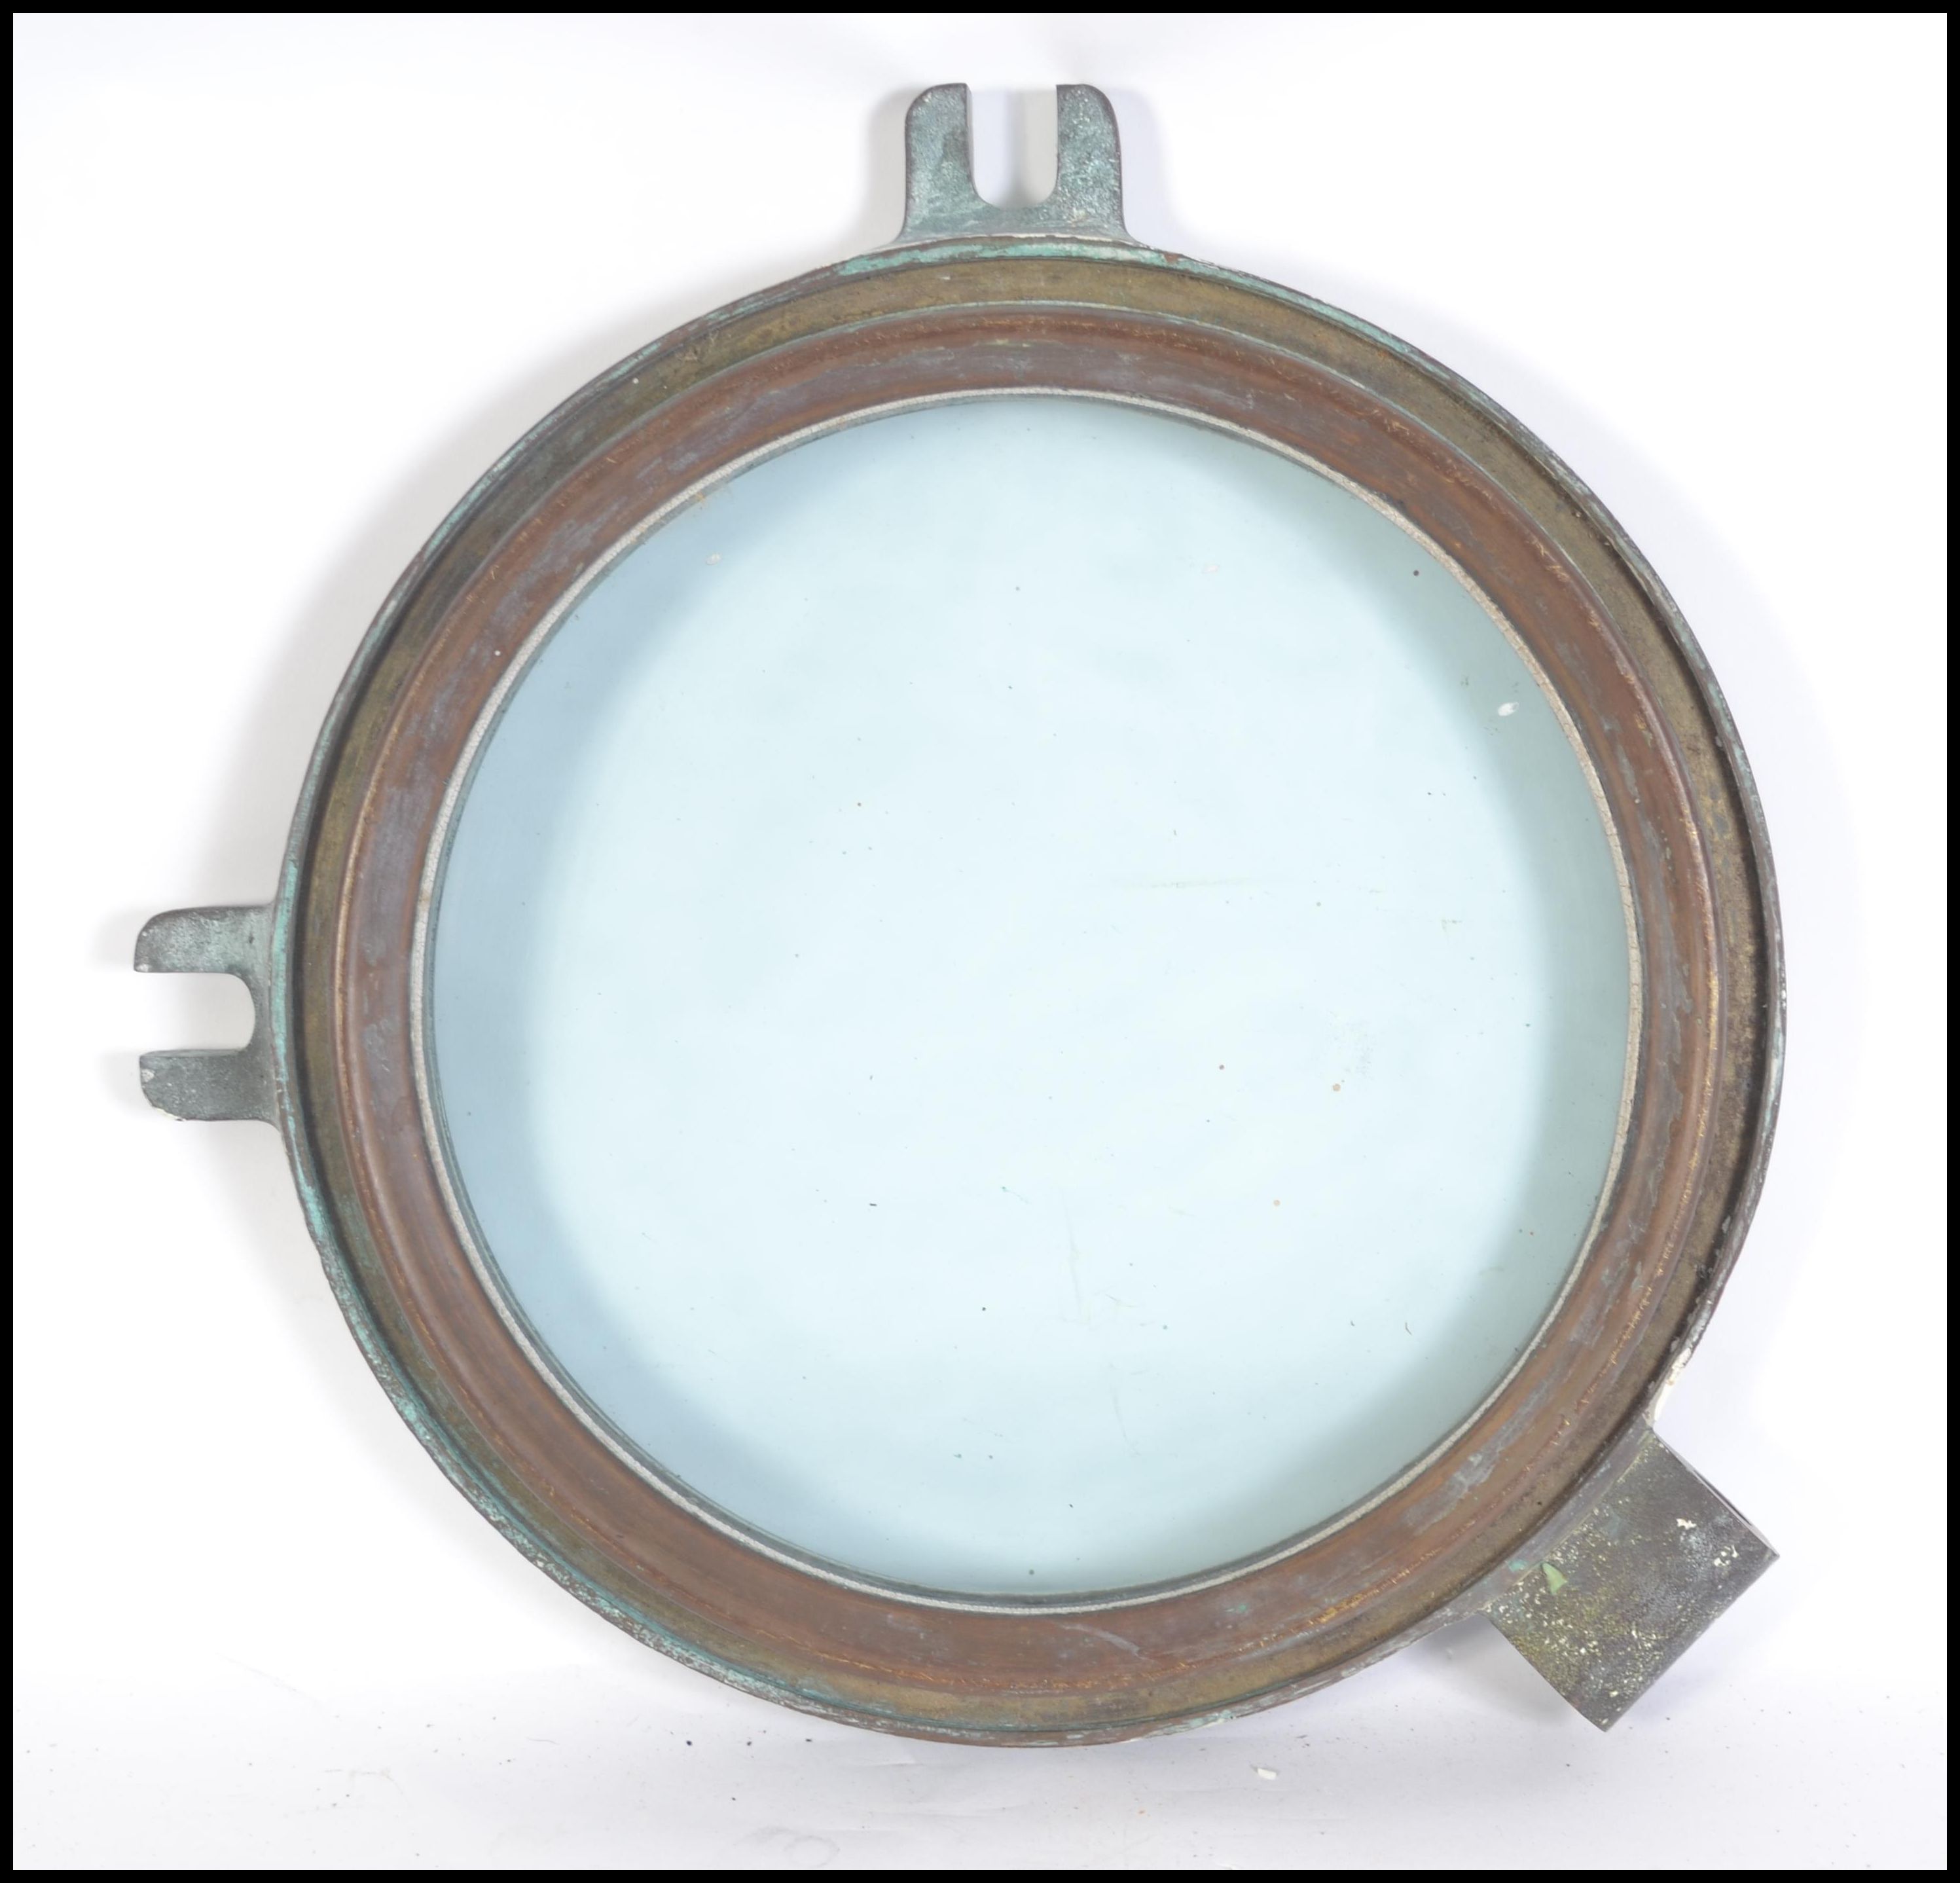 Shipping interest A vintage 20th century industrial brass heavy ships porthole measuring 37cm - Image 3 of 3